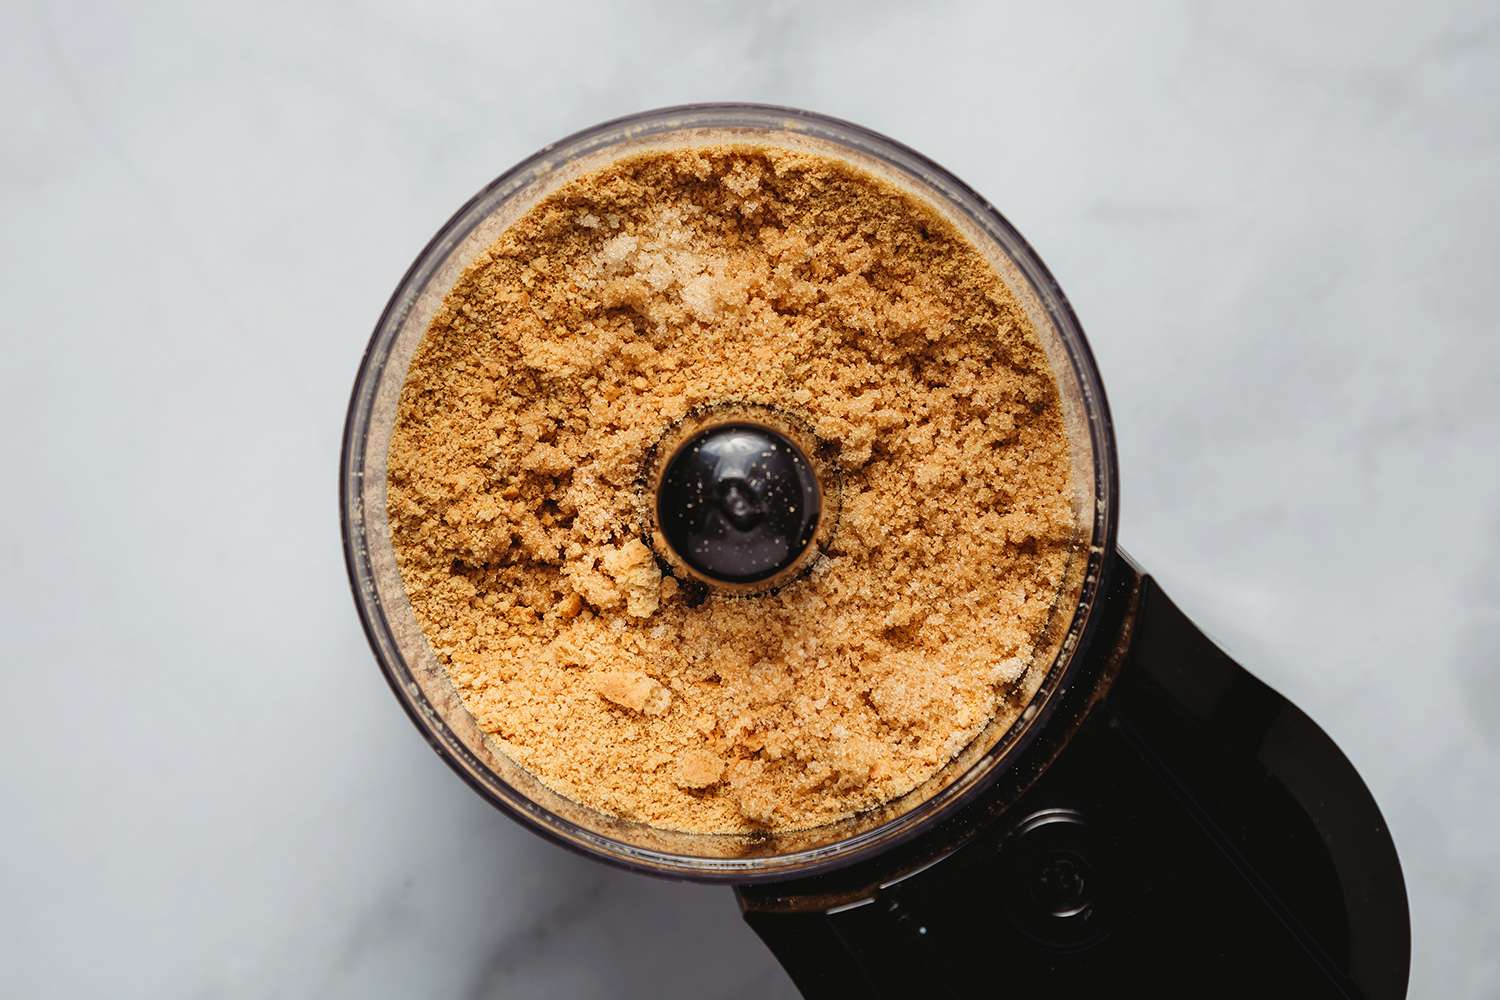 Graham cracker mixture and brown sugar in a food processor 